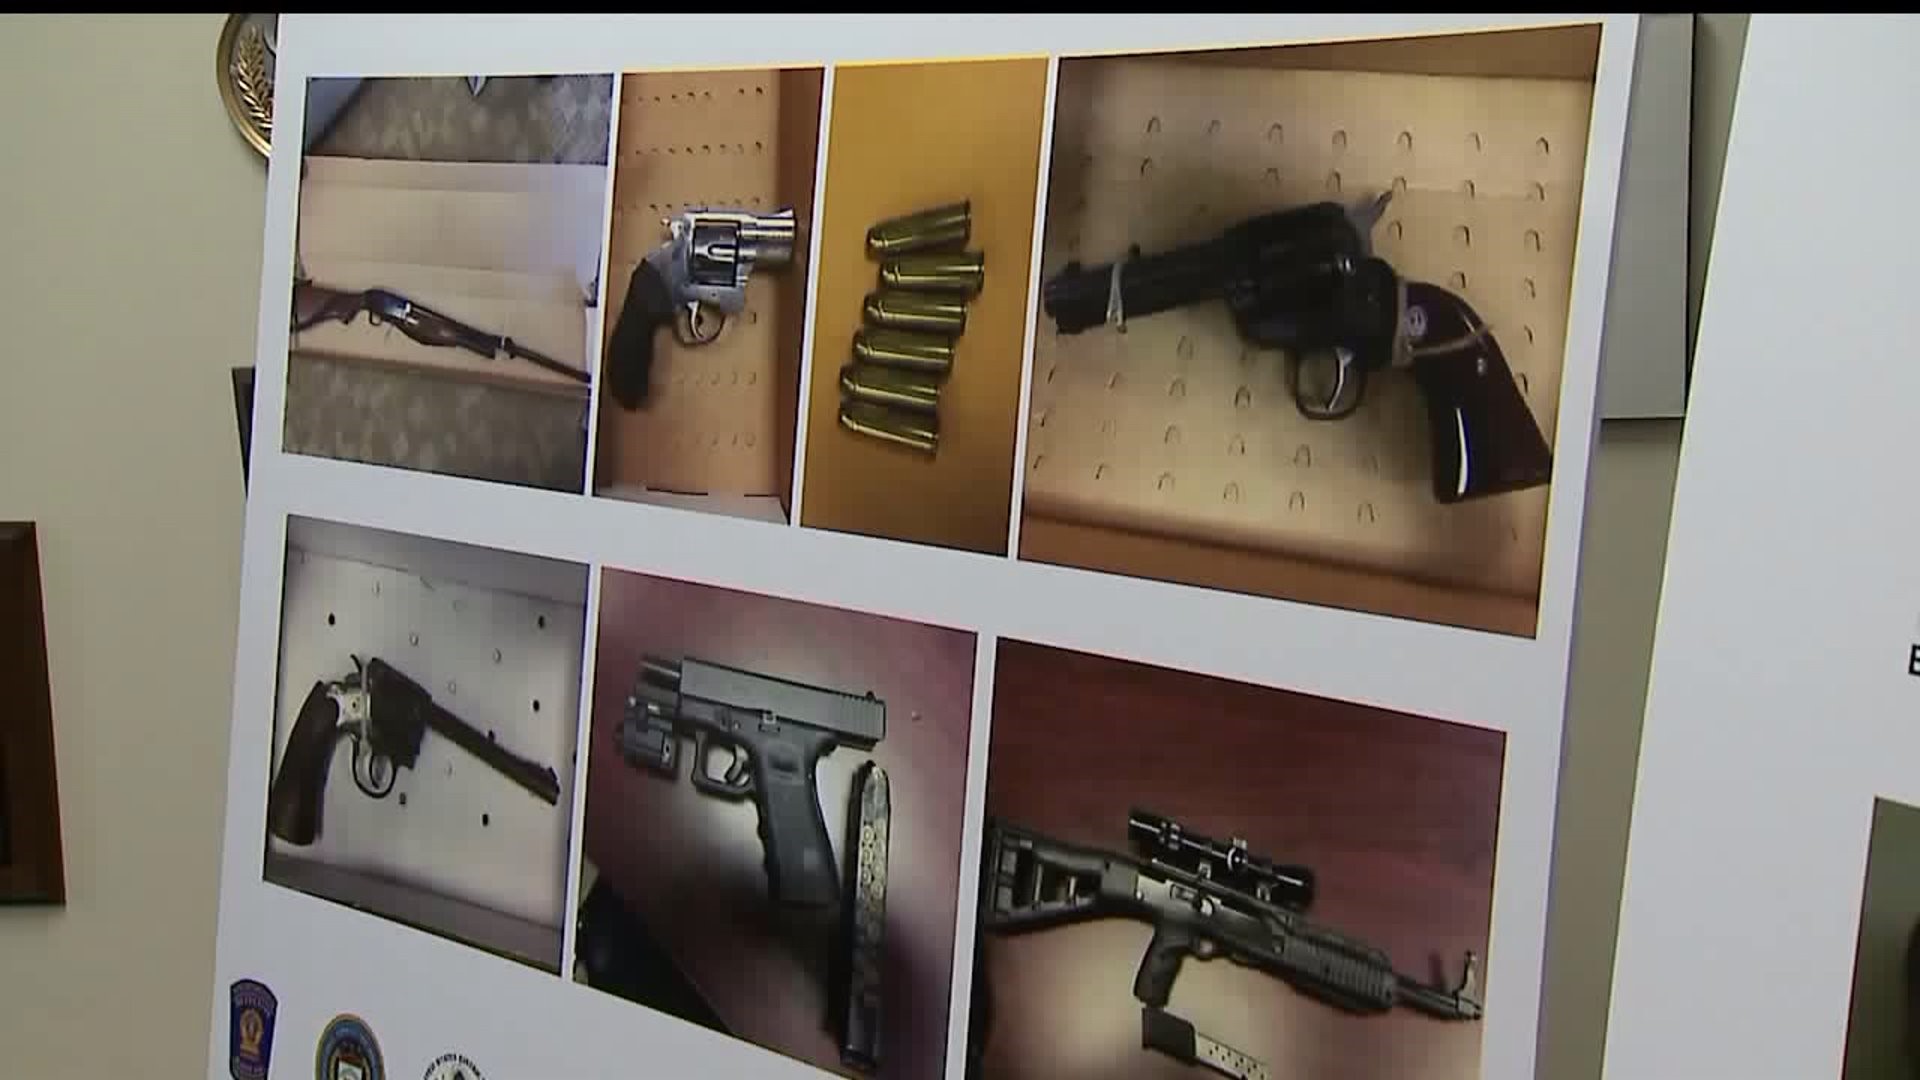 Nine indicted for firearms trafficking in York County in `Operation Gun Grabber`